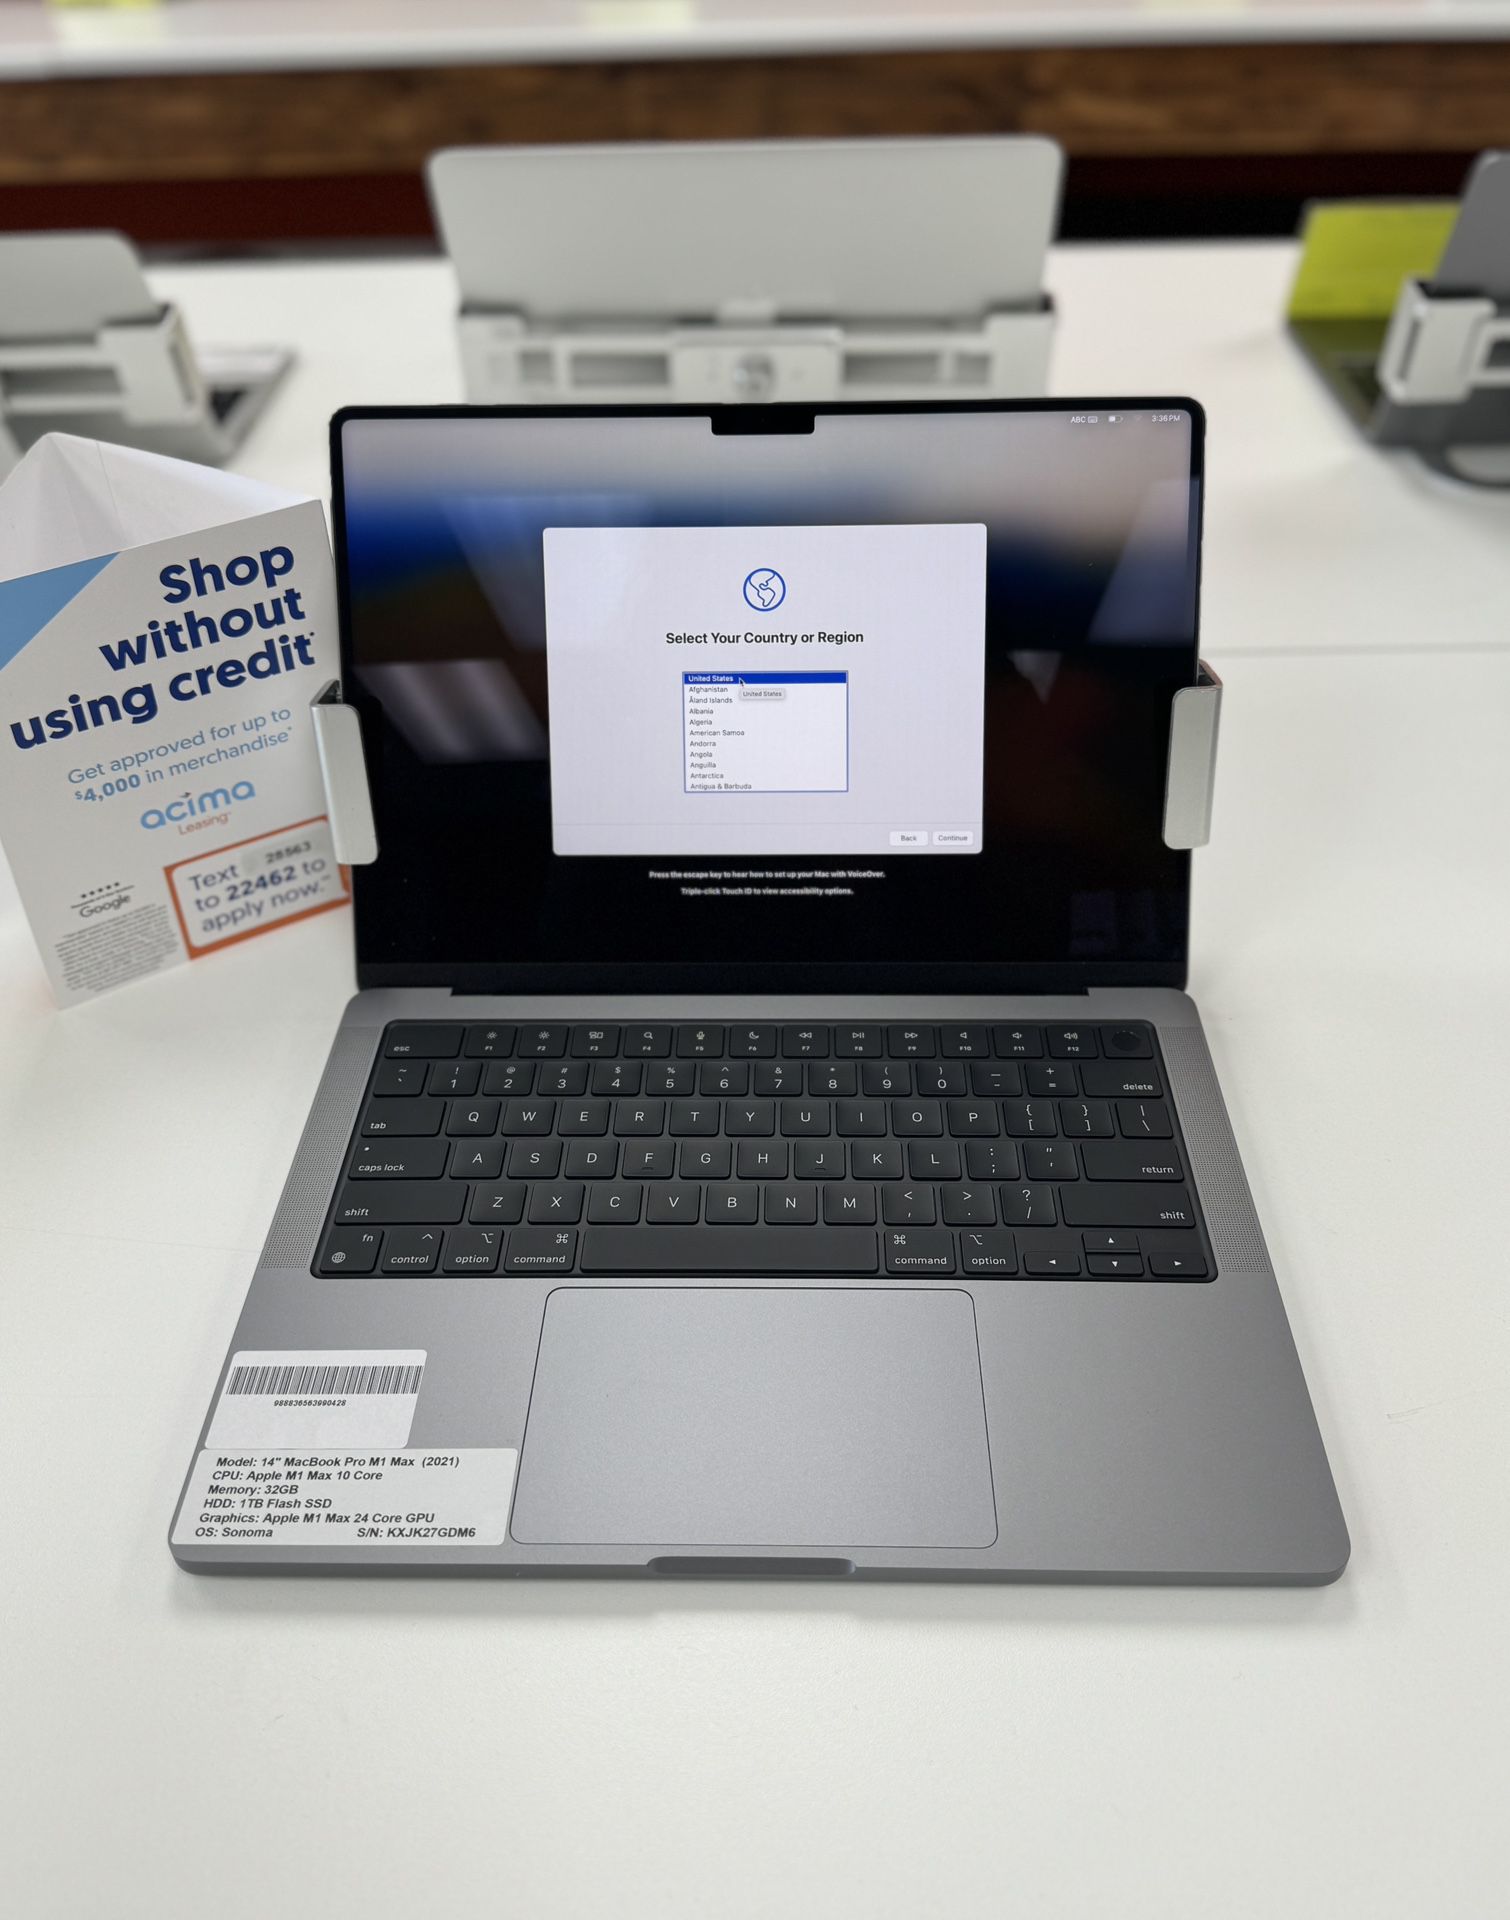 14" MacBook Pro M1 Max 10 Core * 32GB RAM * 1TB SSD  * Financing Available 